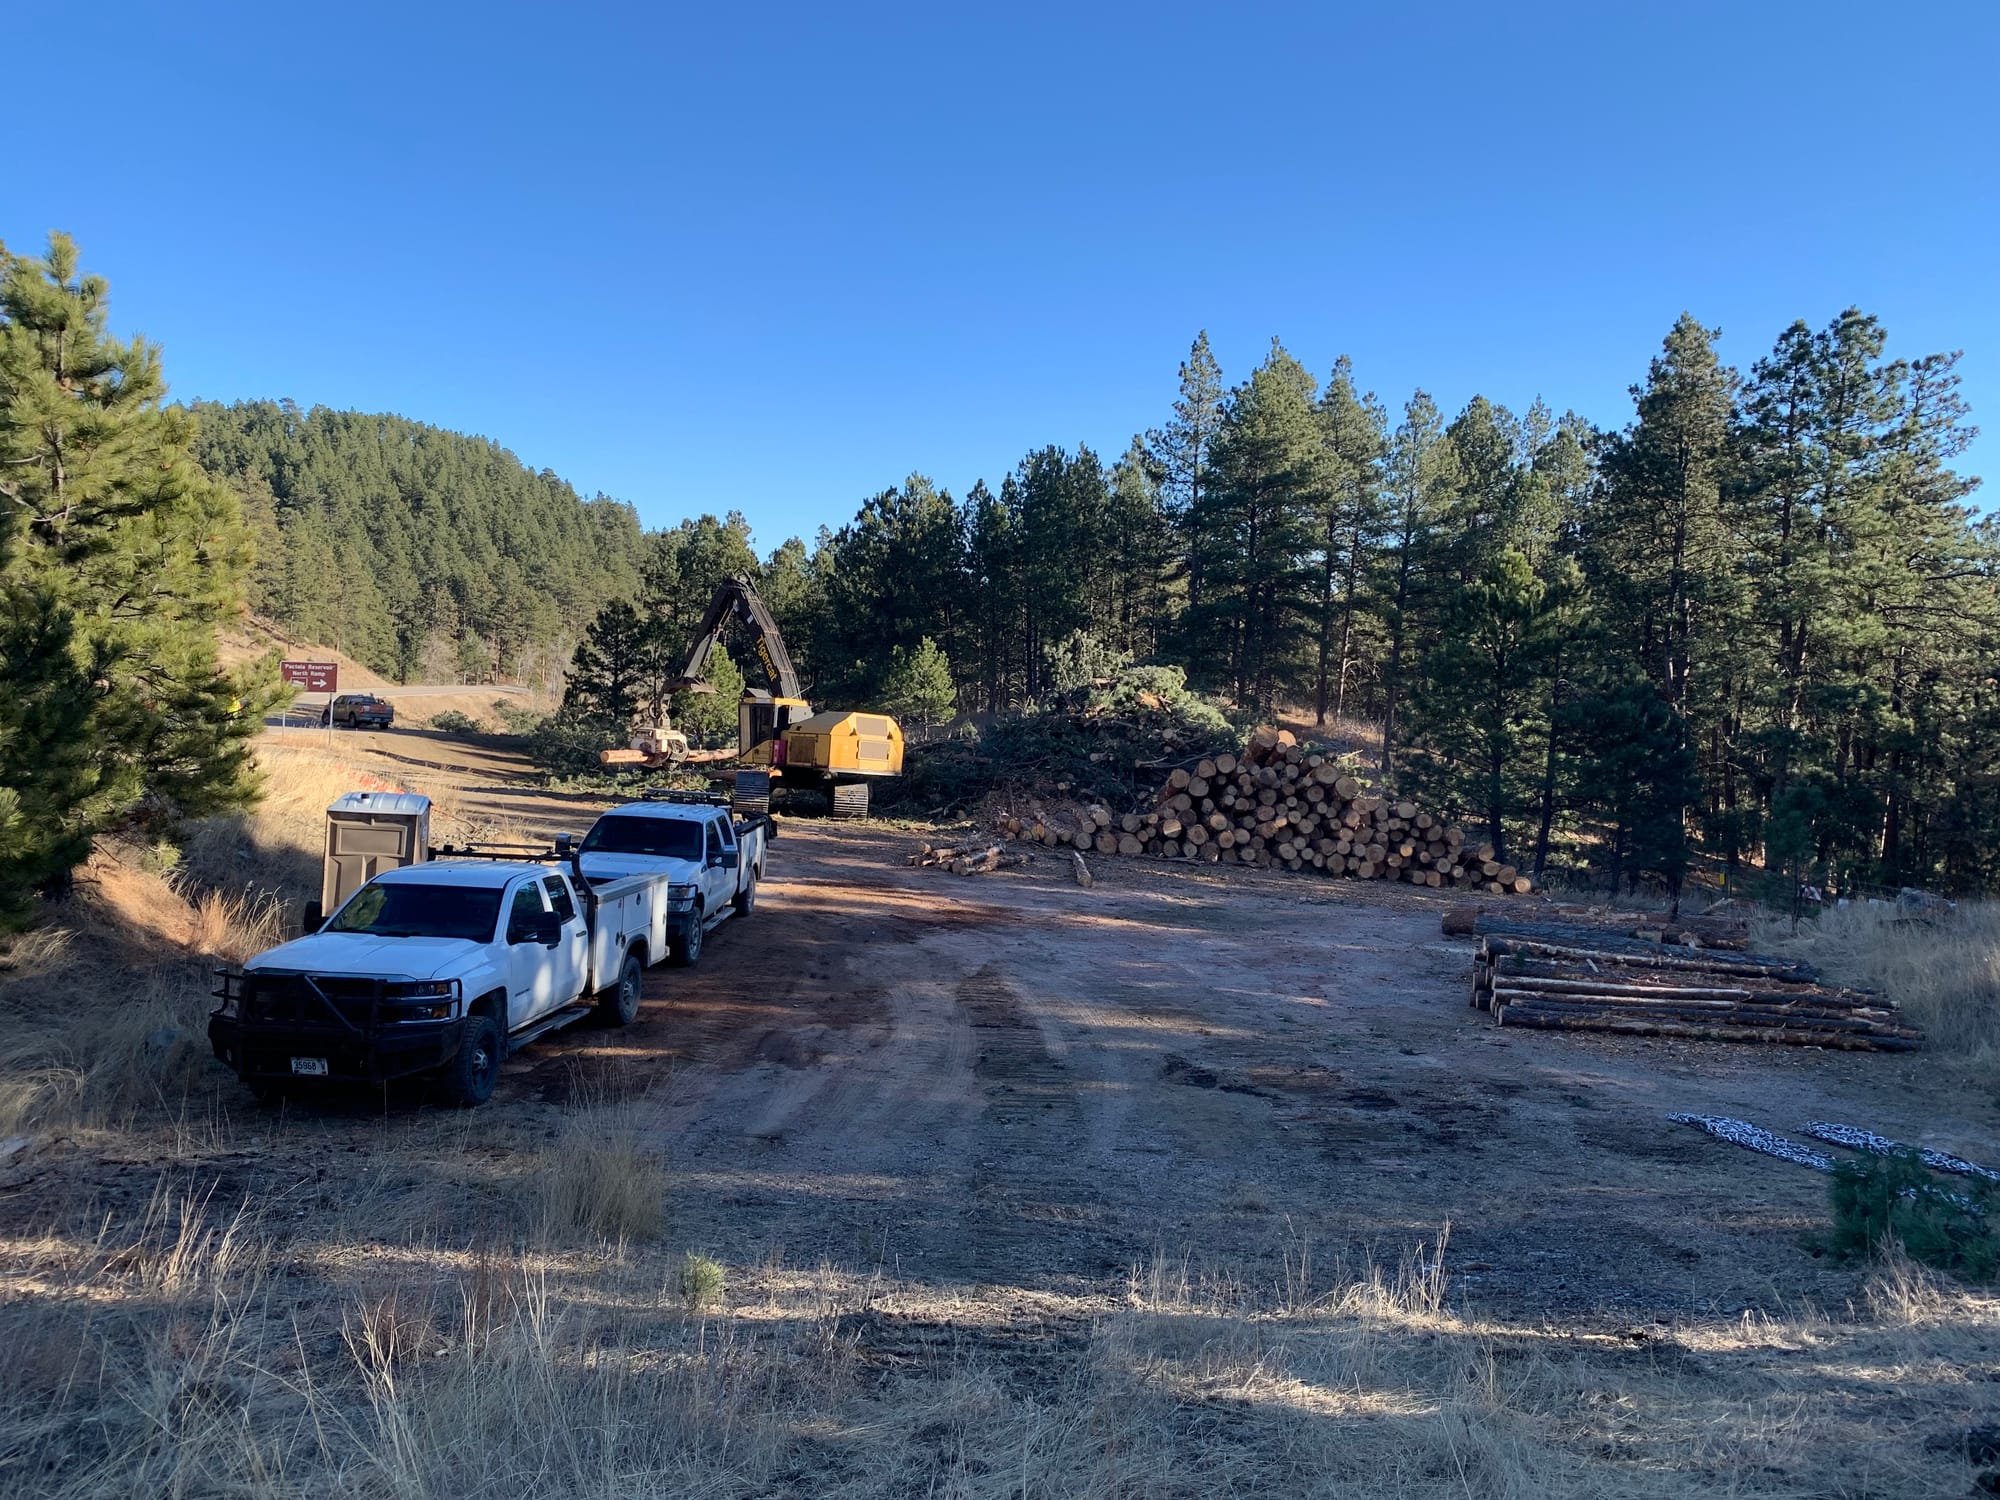 Tree clearing is taking place on US Highway 385 in the Black Hills, South Dakota